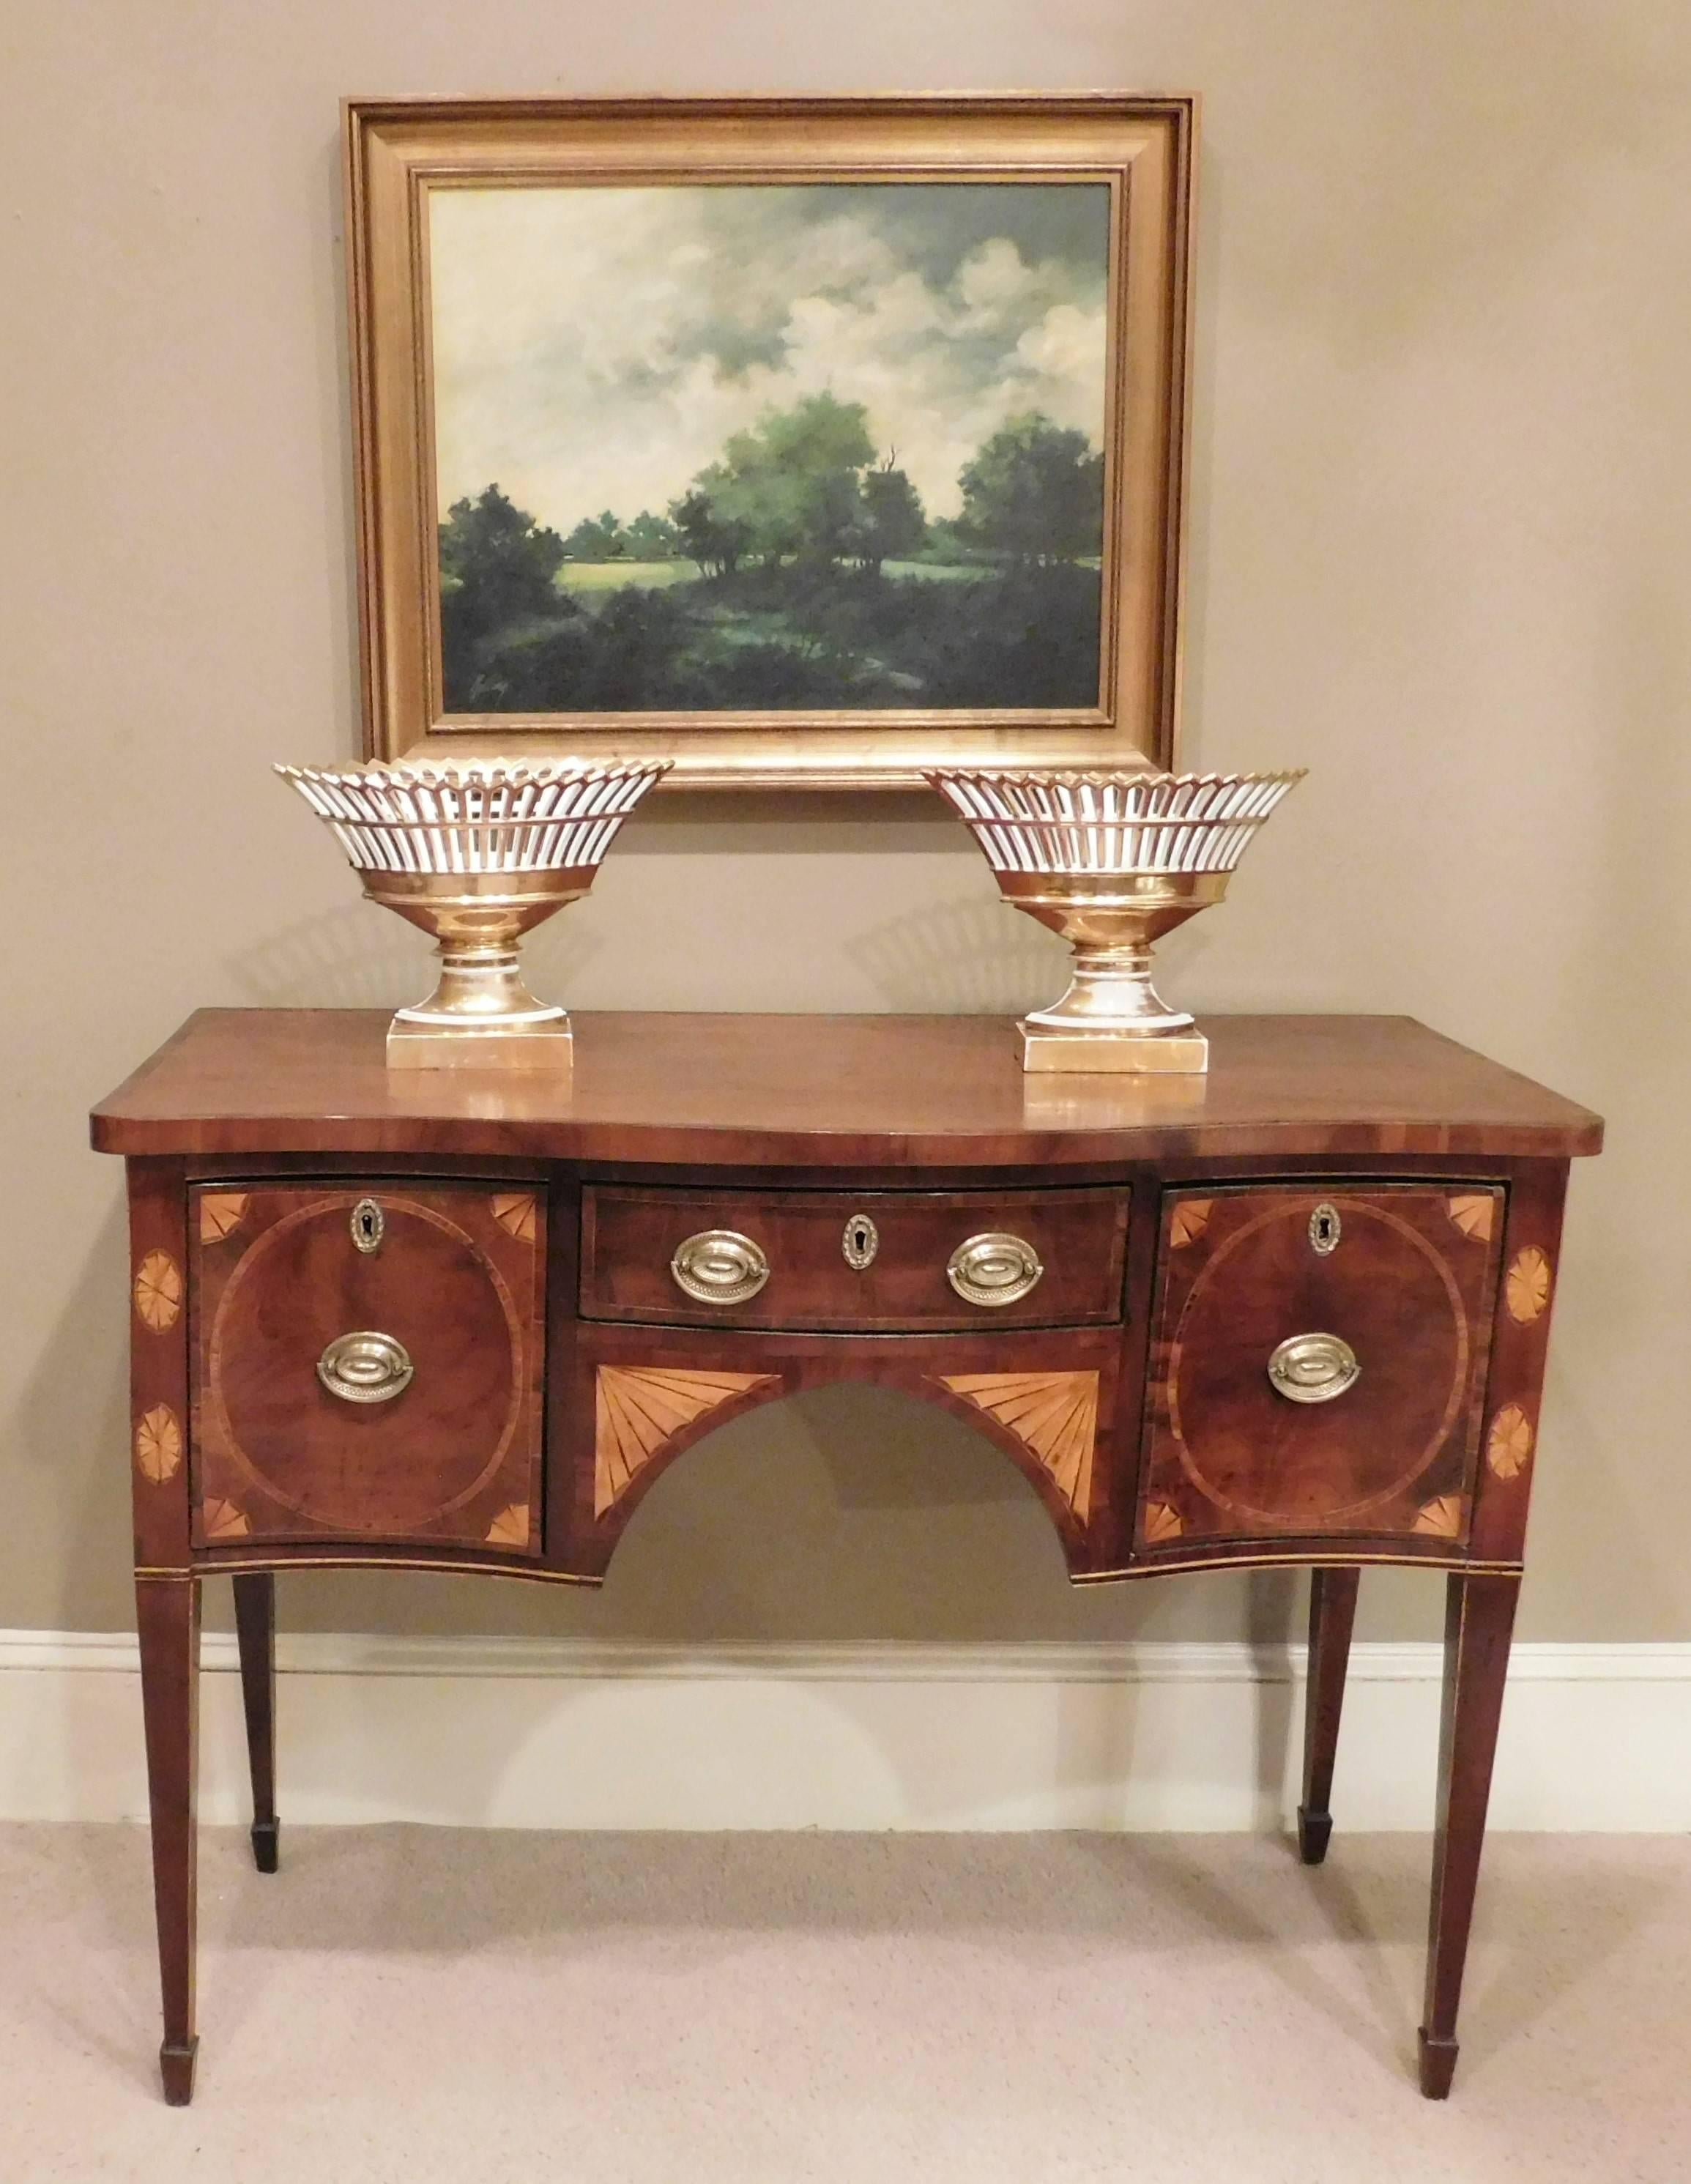 Mahogany George III sideboard with satinwood inlay and English oak secondary wood. Consists of one center drawer and two deep end drawers. Banded top and spade feet. Brass hardware are old replacements.